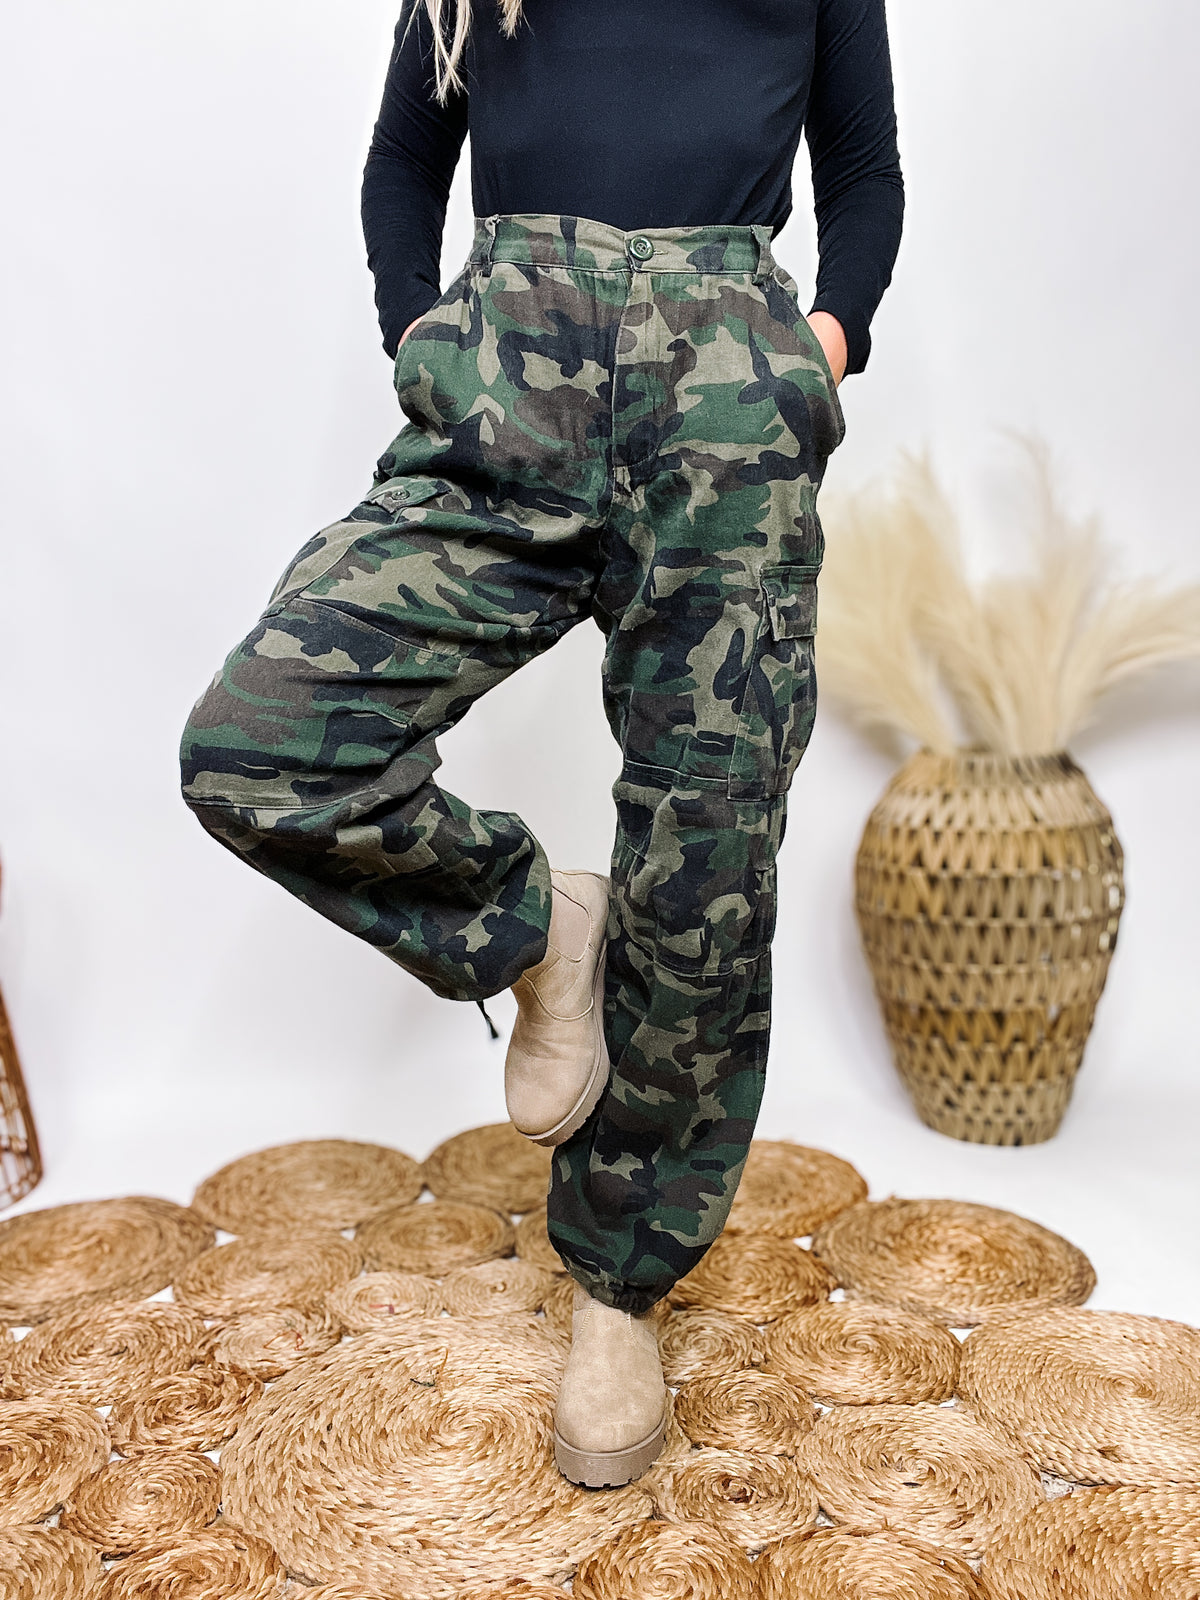 Better Be Camoflauge Cargo Pants Pull On Style Side Pockets Adjustable Tie Bottoms to Become Joggers Stretchy Elastic Back Pockets Relaxed Fit 95% Cotton, 5% Spandex True to Size (meant to be relaxed/baggy fit but can size down if you want more fitted)